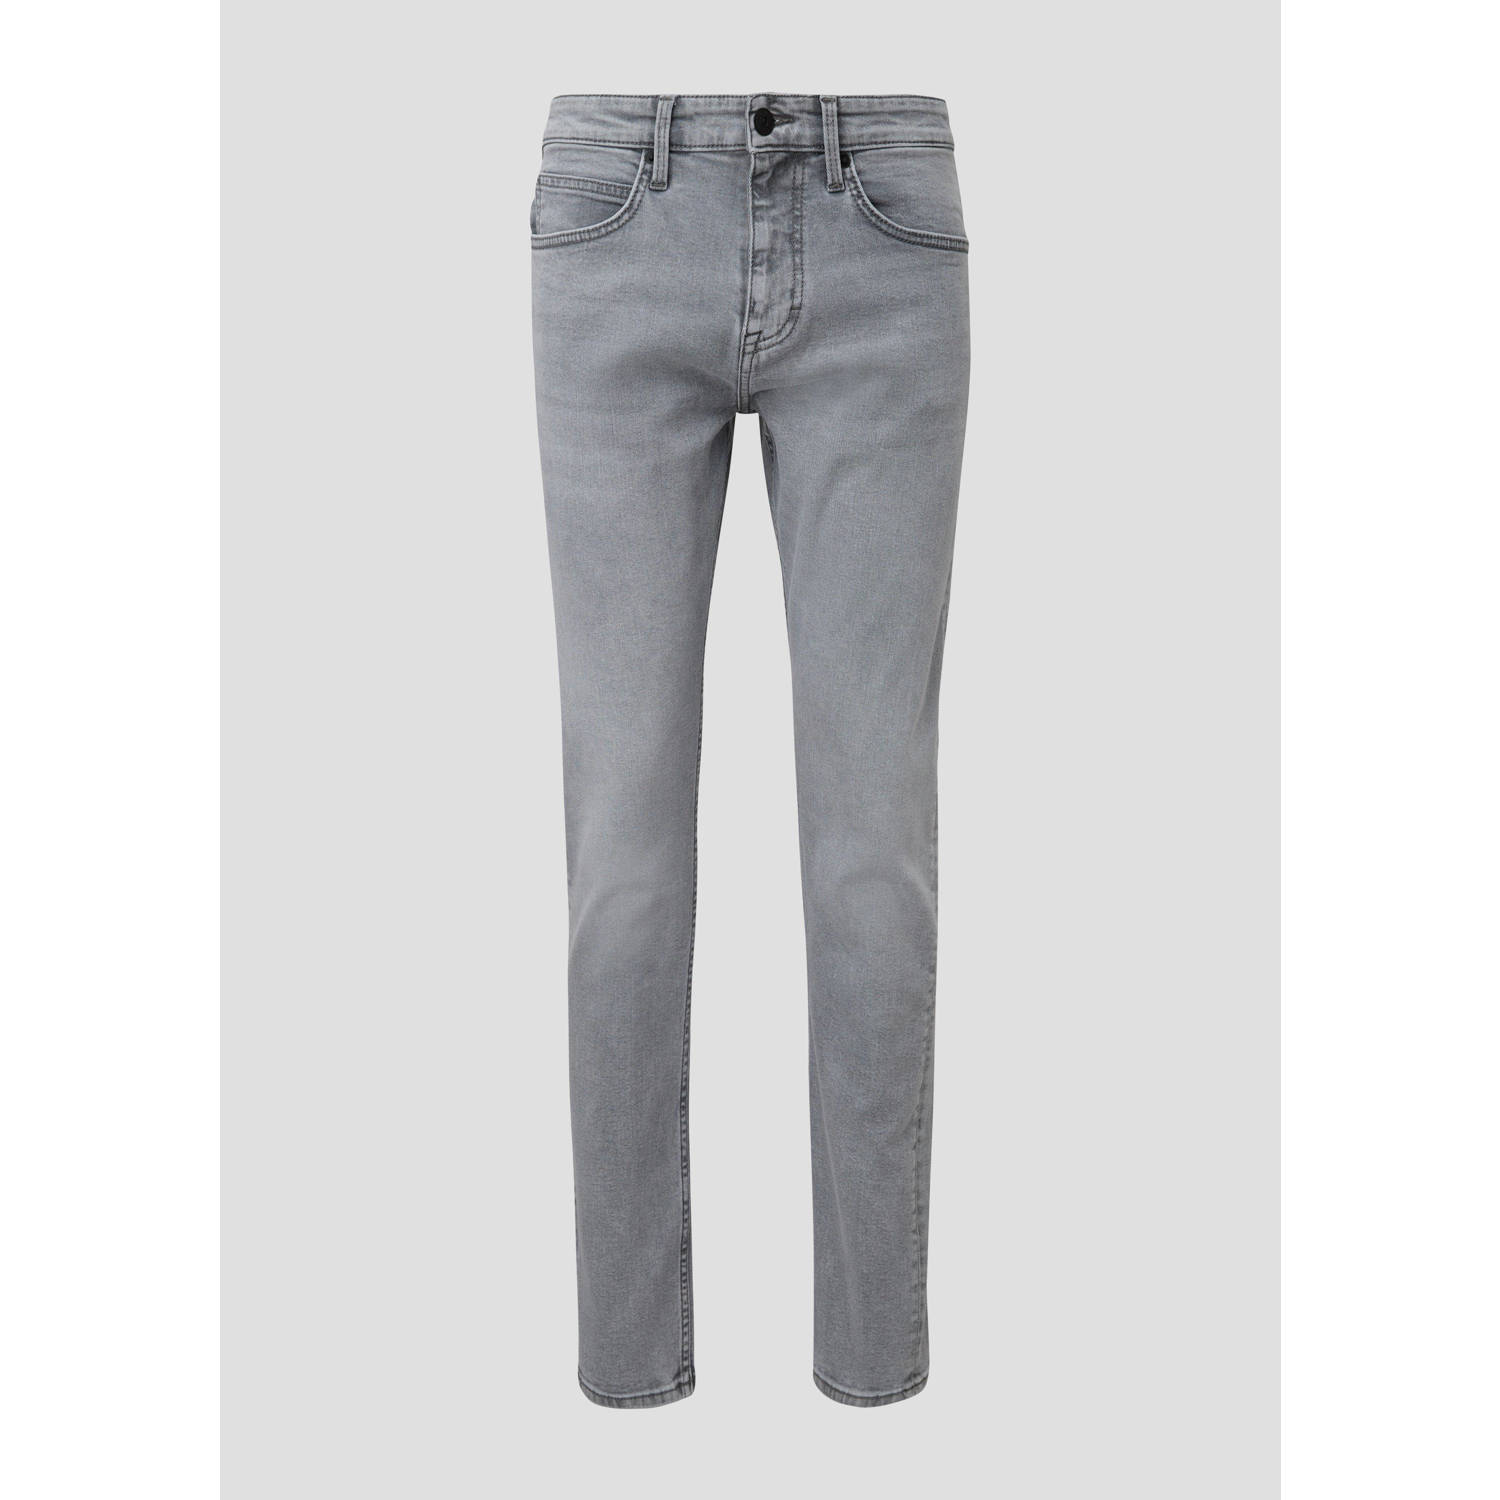 Q S by s.Oliver tapered fit jeans grijs